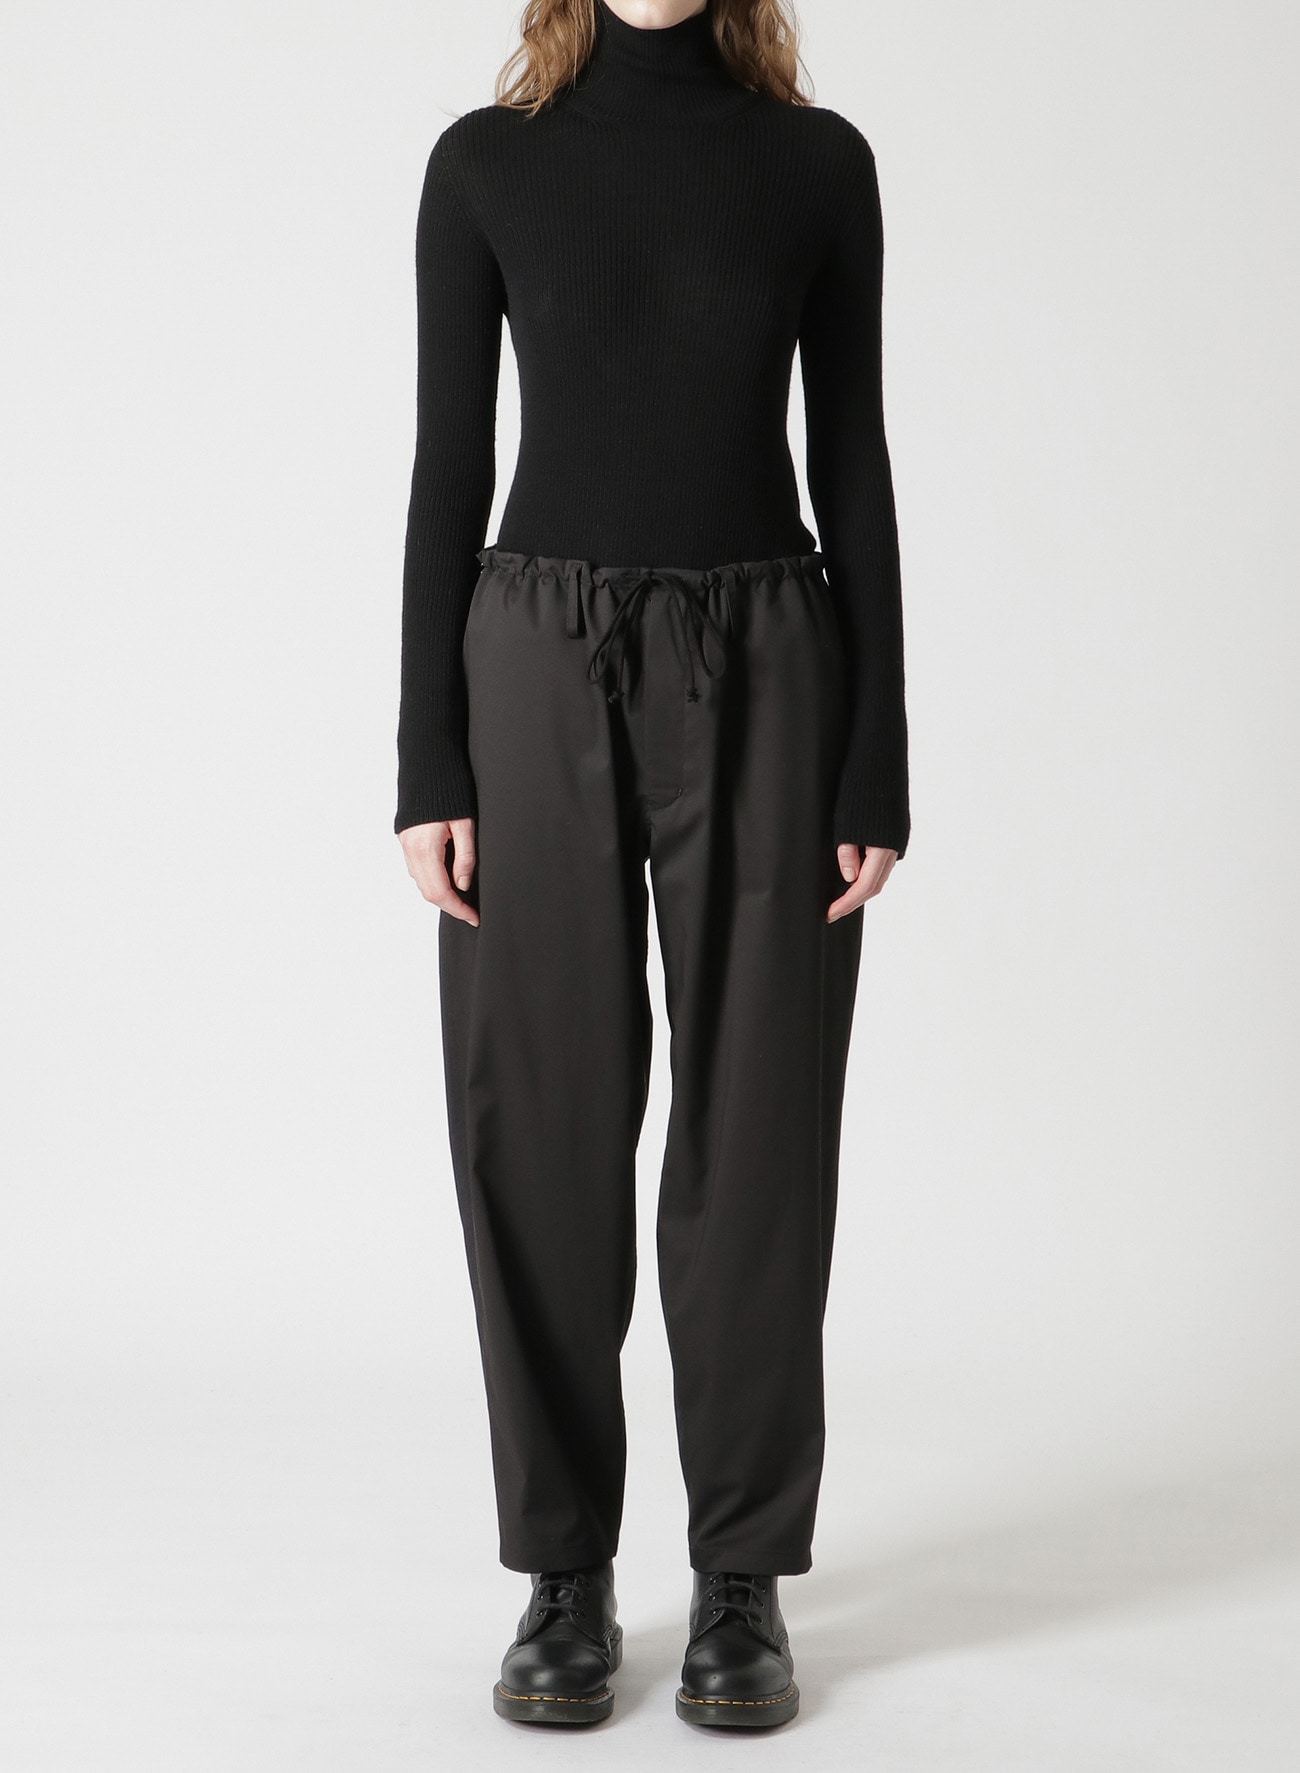 STRETCHY POLYESTER/RAYON TWILL DRAWSTRING PANTS(S Black): Y's｜THE ...